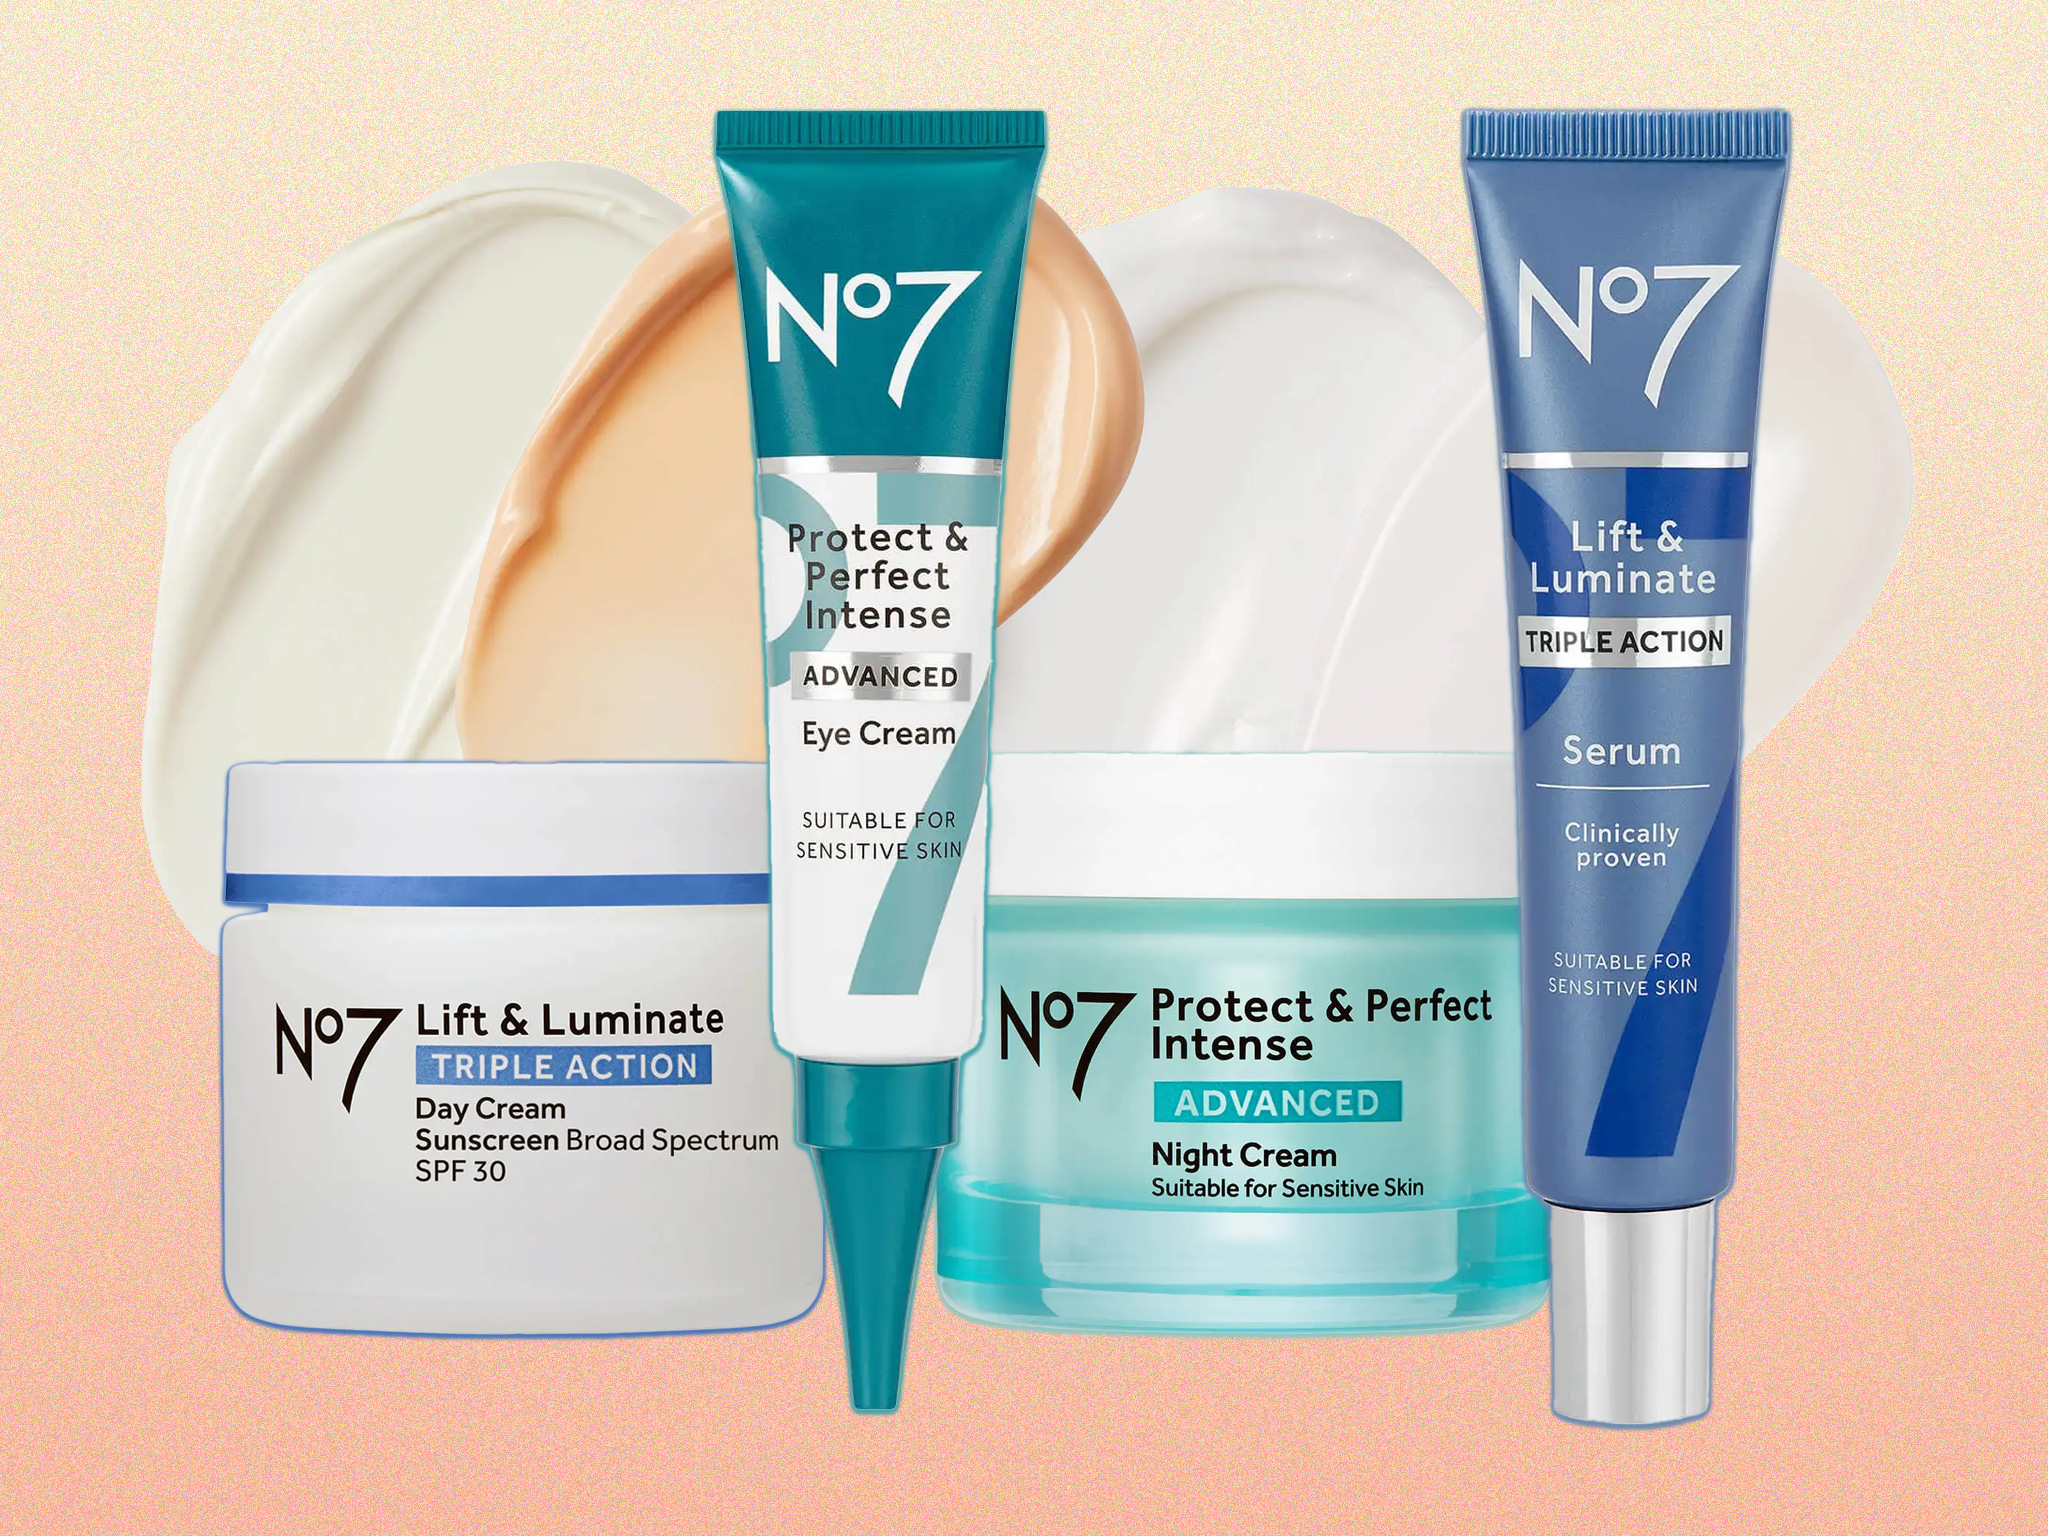 No7 - Do you use our Protect & Perfect skincare products?